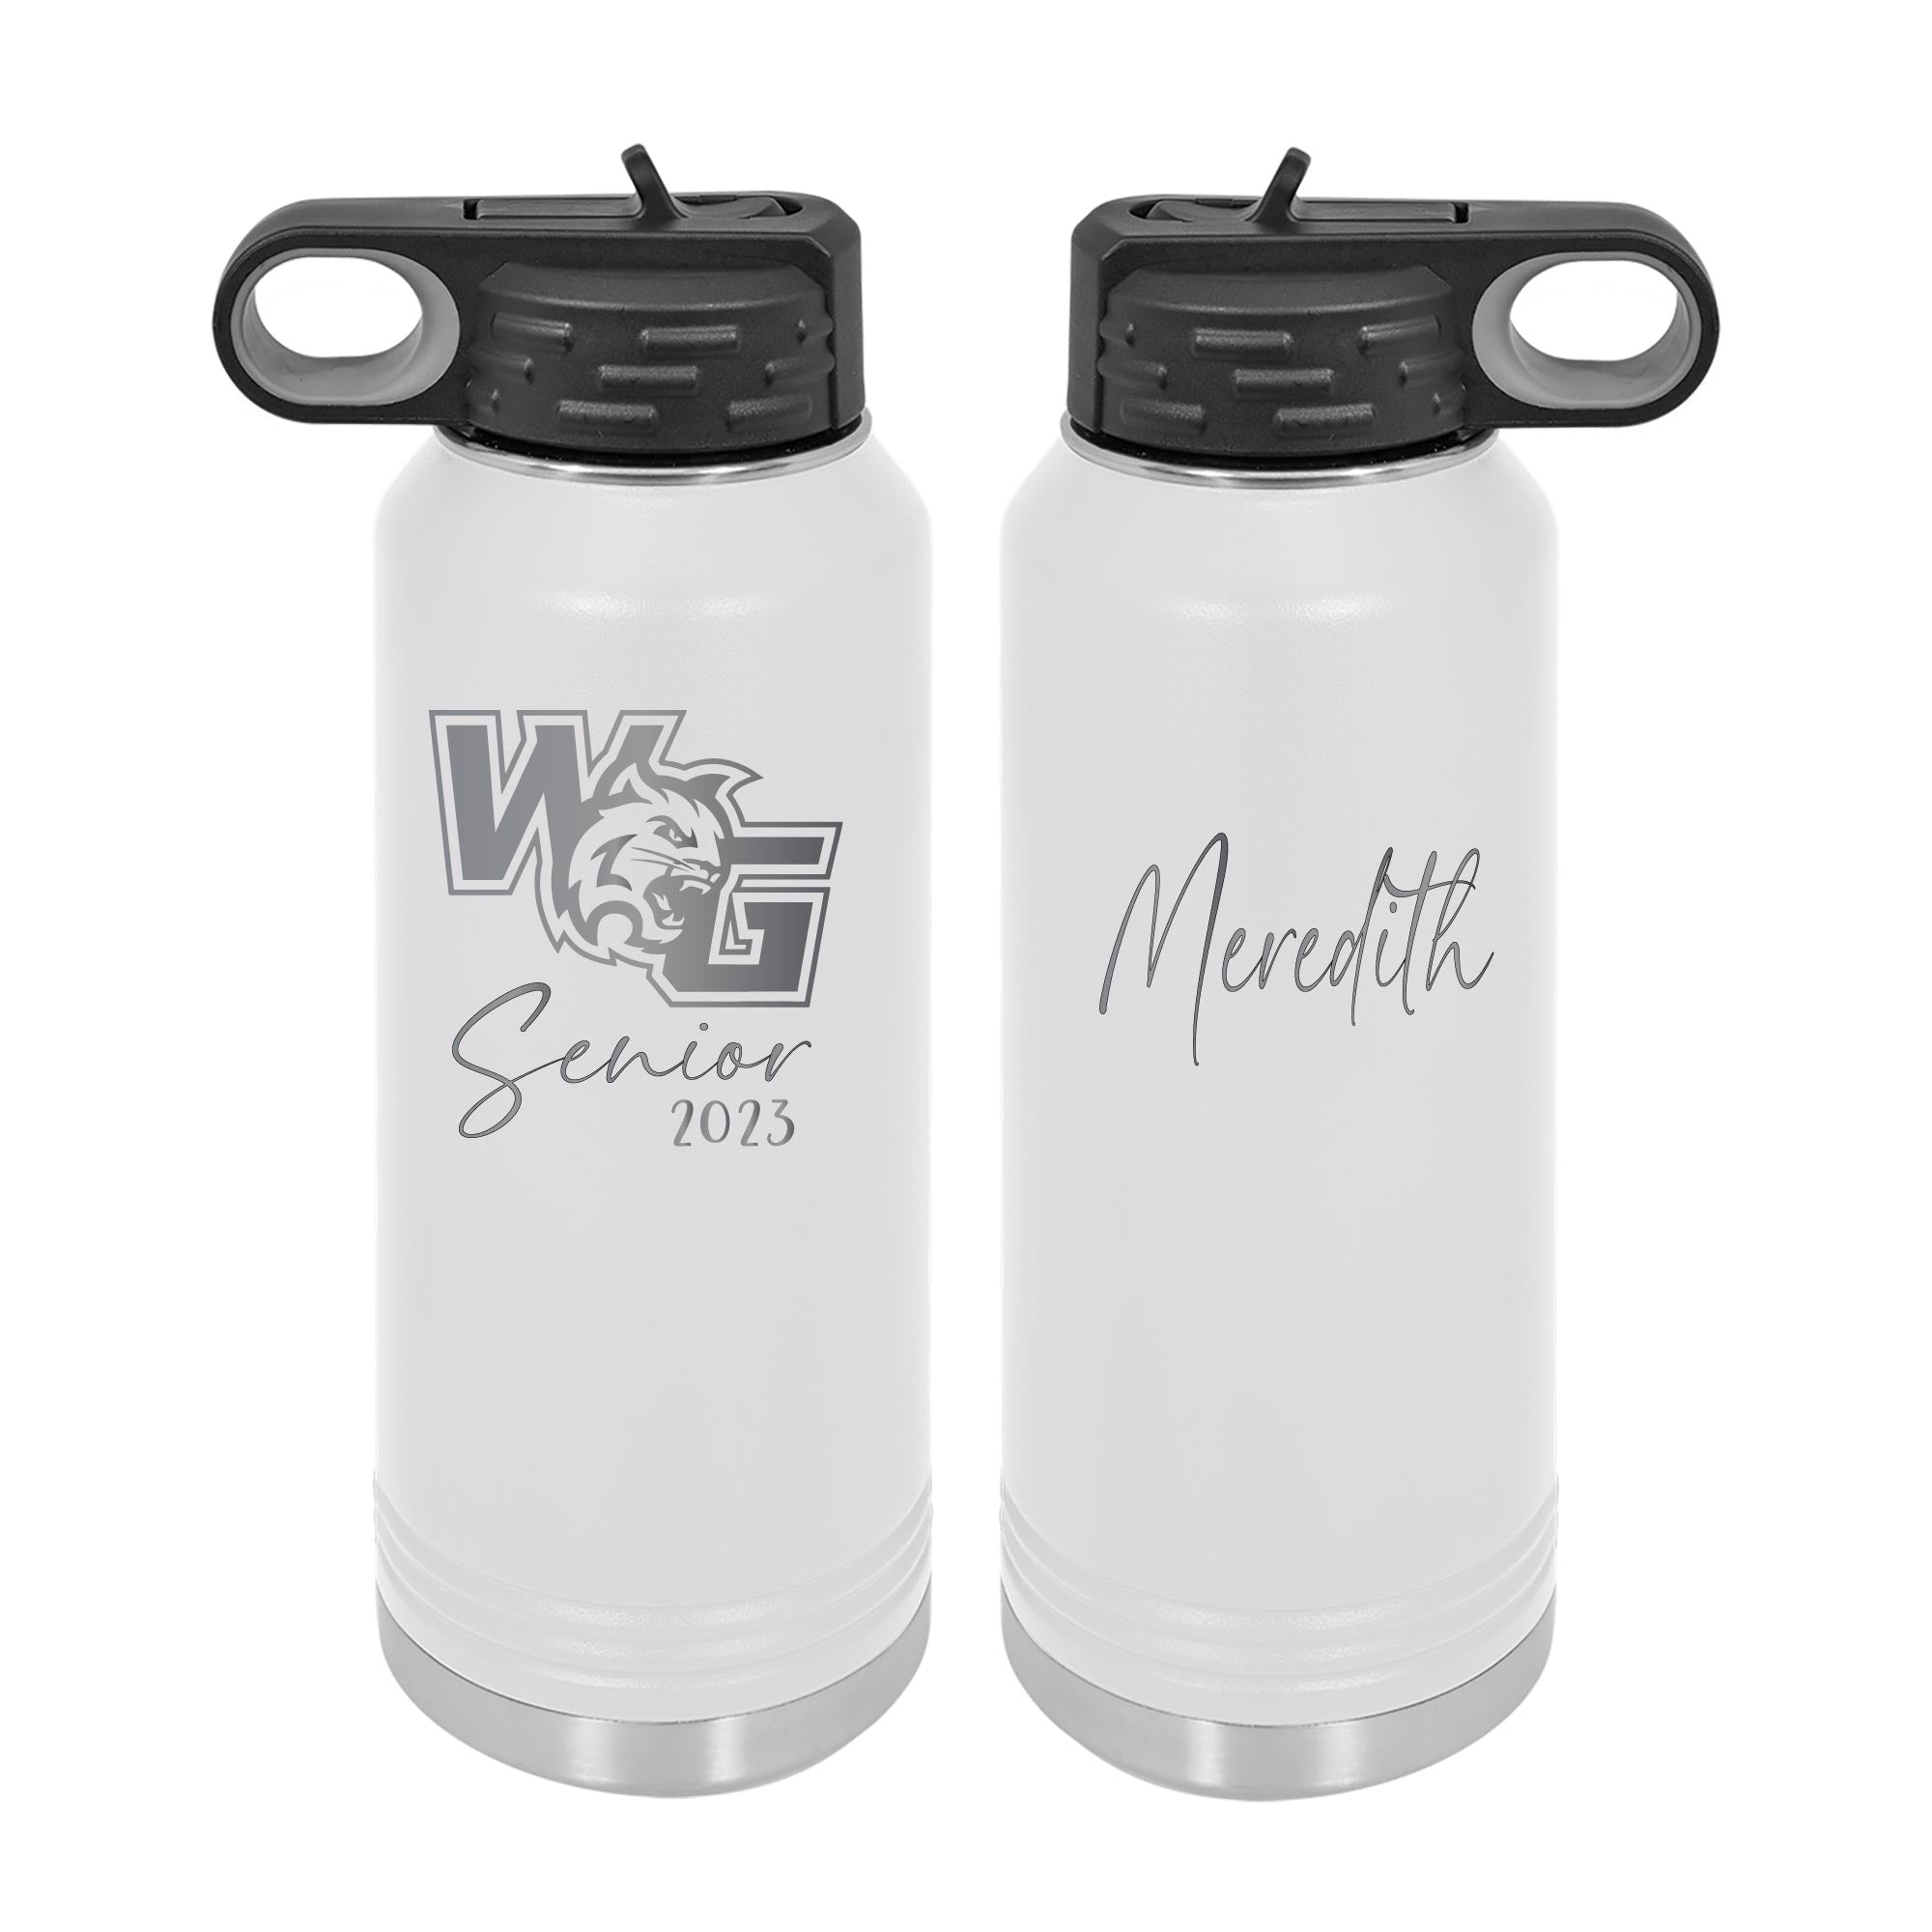 Personalized Senior 2023 Water Bottle - Customizable with School Logo and  Name - 32 oz Polar Bottle, Double-Wall Vacuum Insulated, Non-Slip Base -  Madi Kay Designs